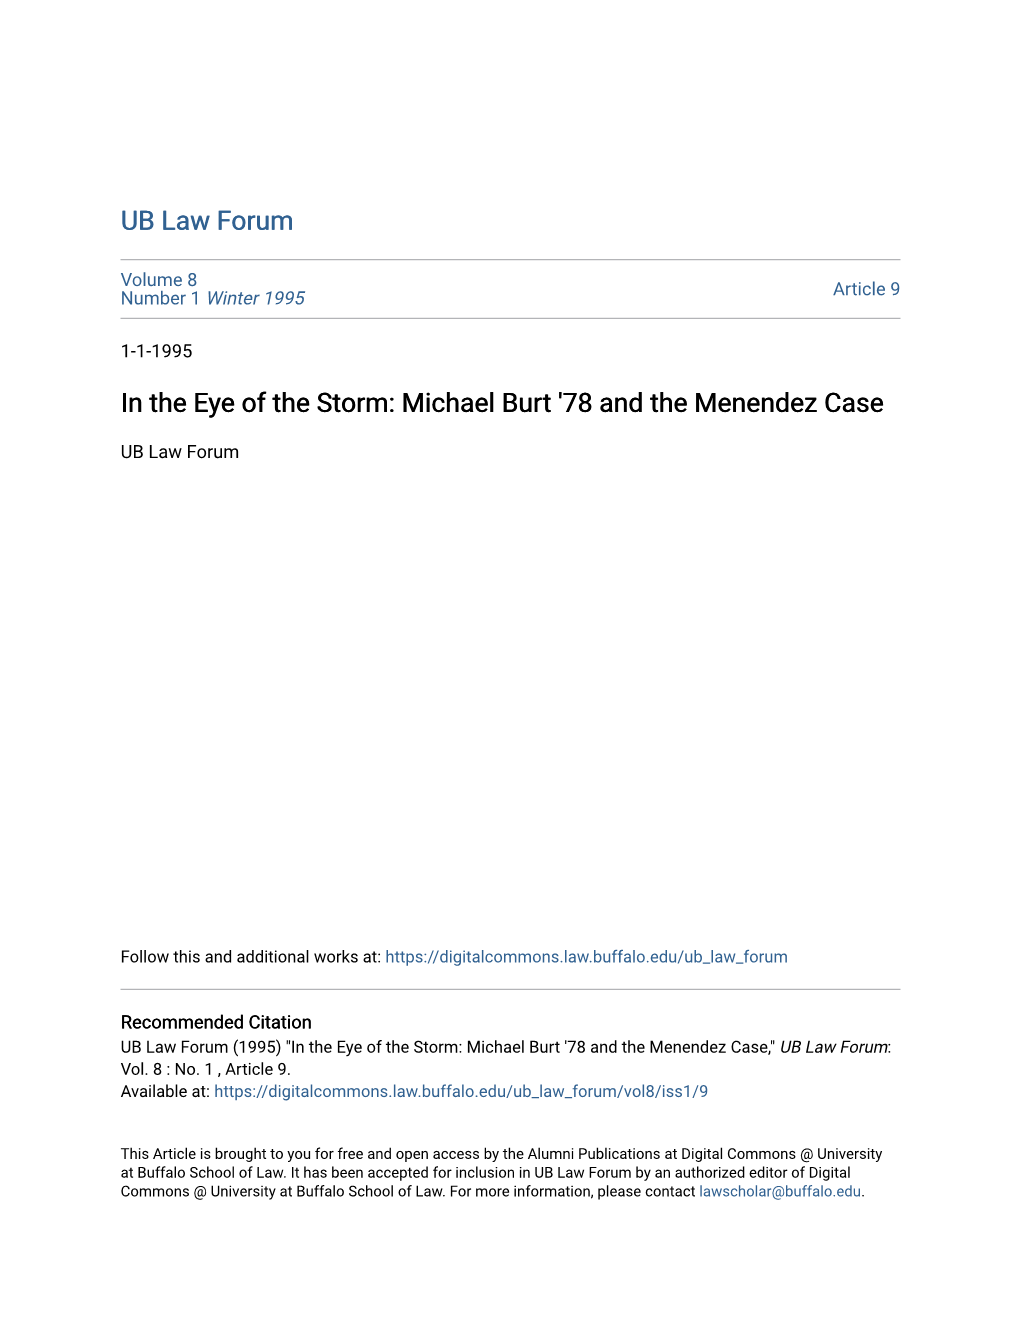 In the Eye of the Storm: Michael Burt '78 and the Menendez Case